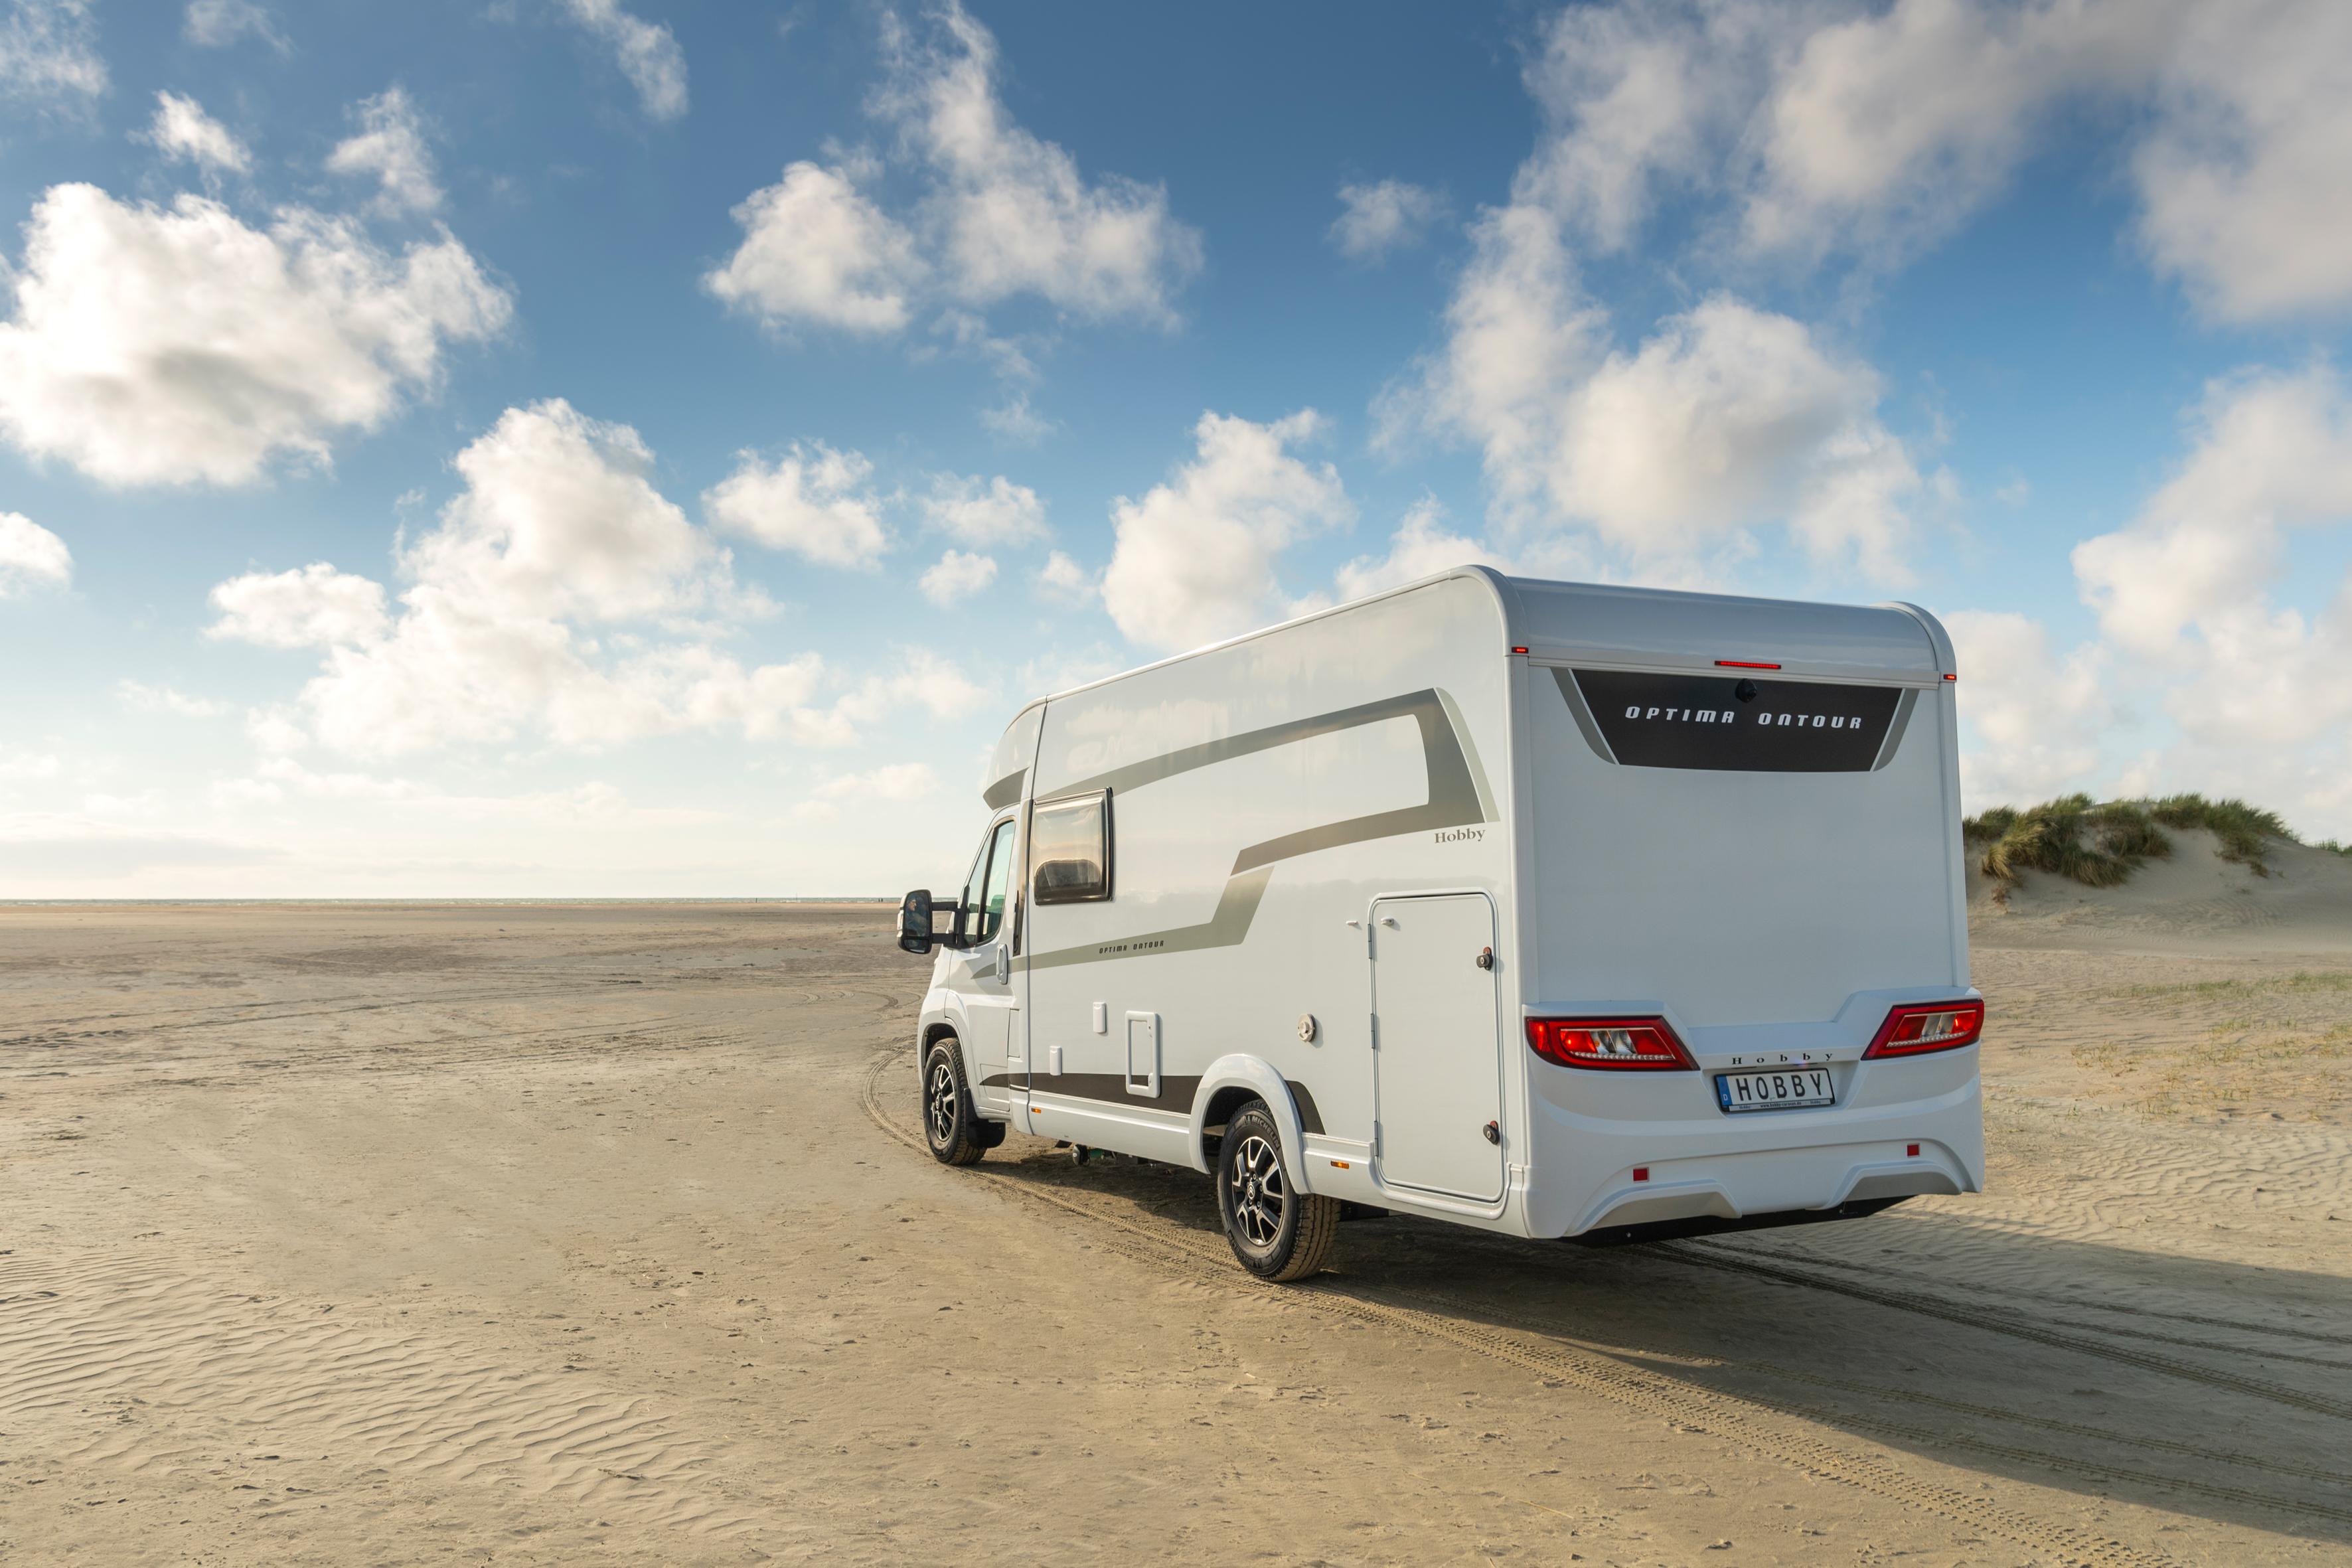 Hobby Optima OnTour T65 HKM - for 6 people! – image 3